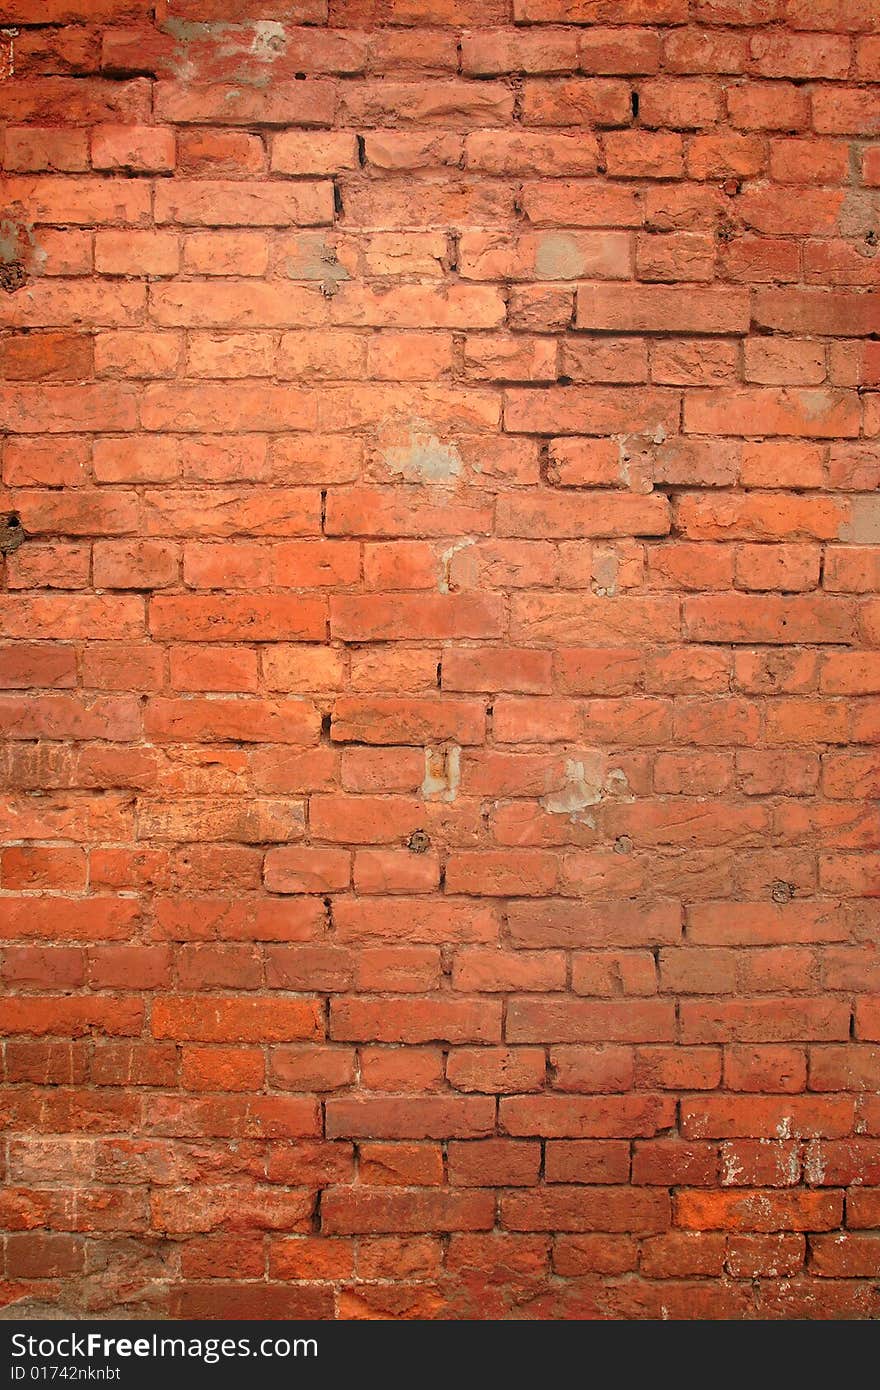 Red grunge brick wall can serve as background. Red grunge brick wall can serve as background